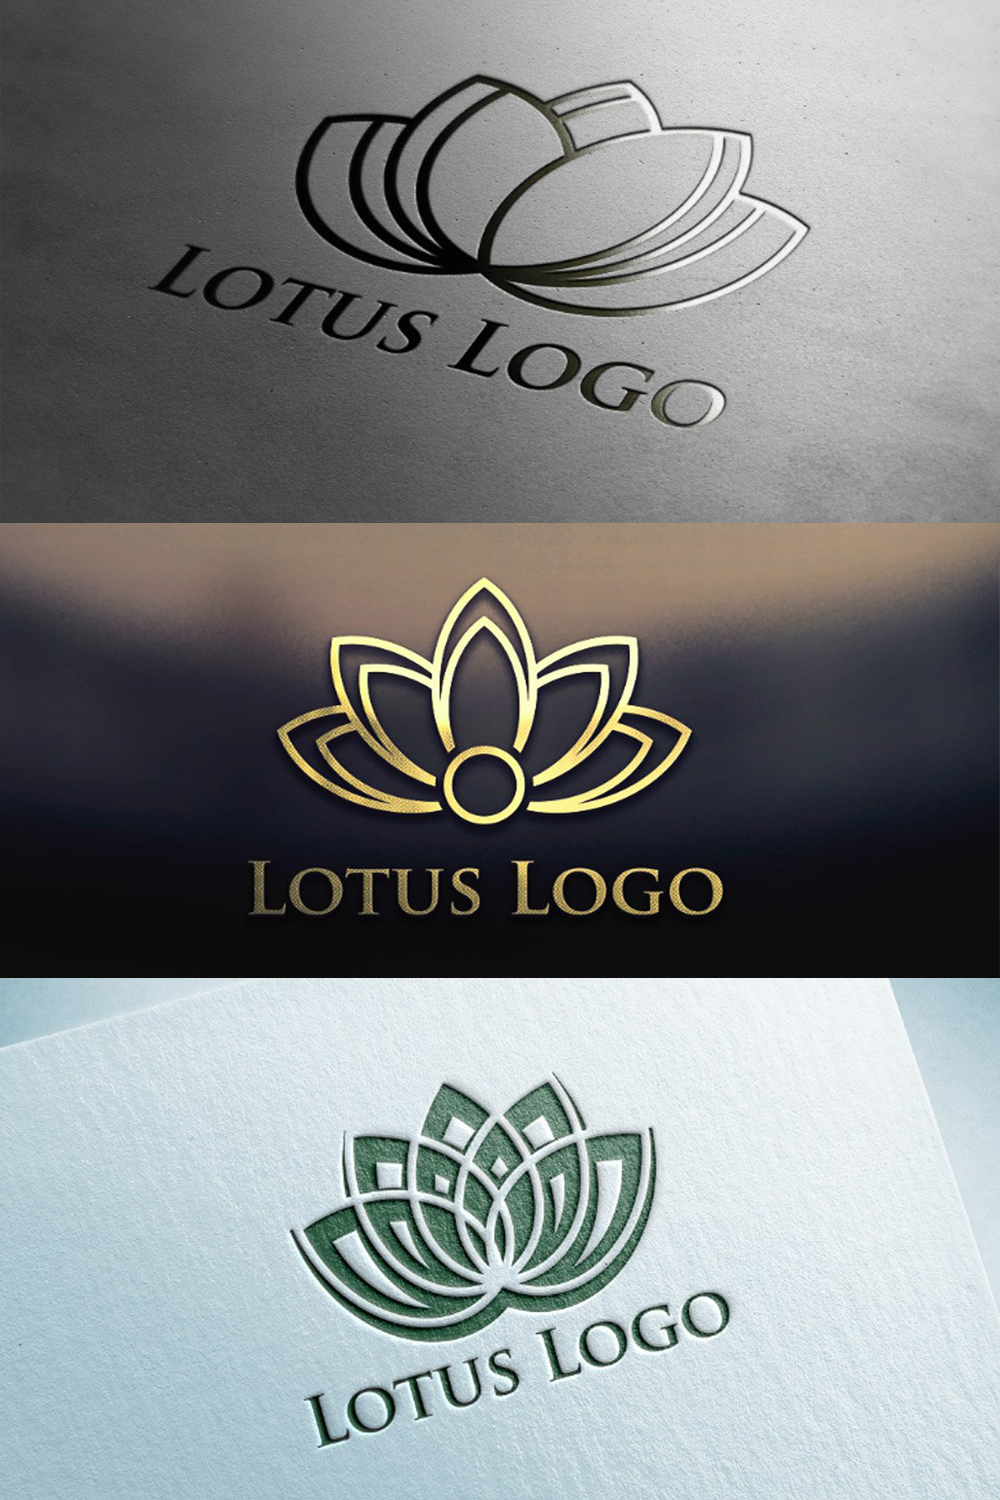 Silver, gold and green lotus flower logos on grey, brown with gradient and green backgrounds.